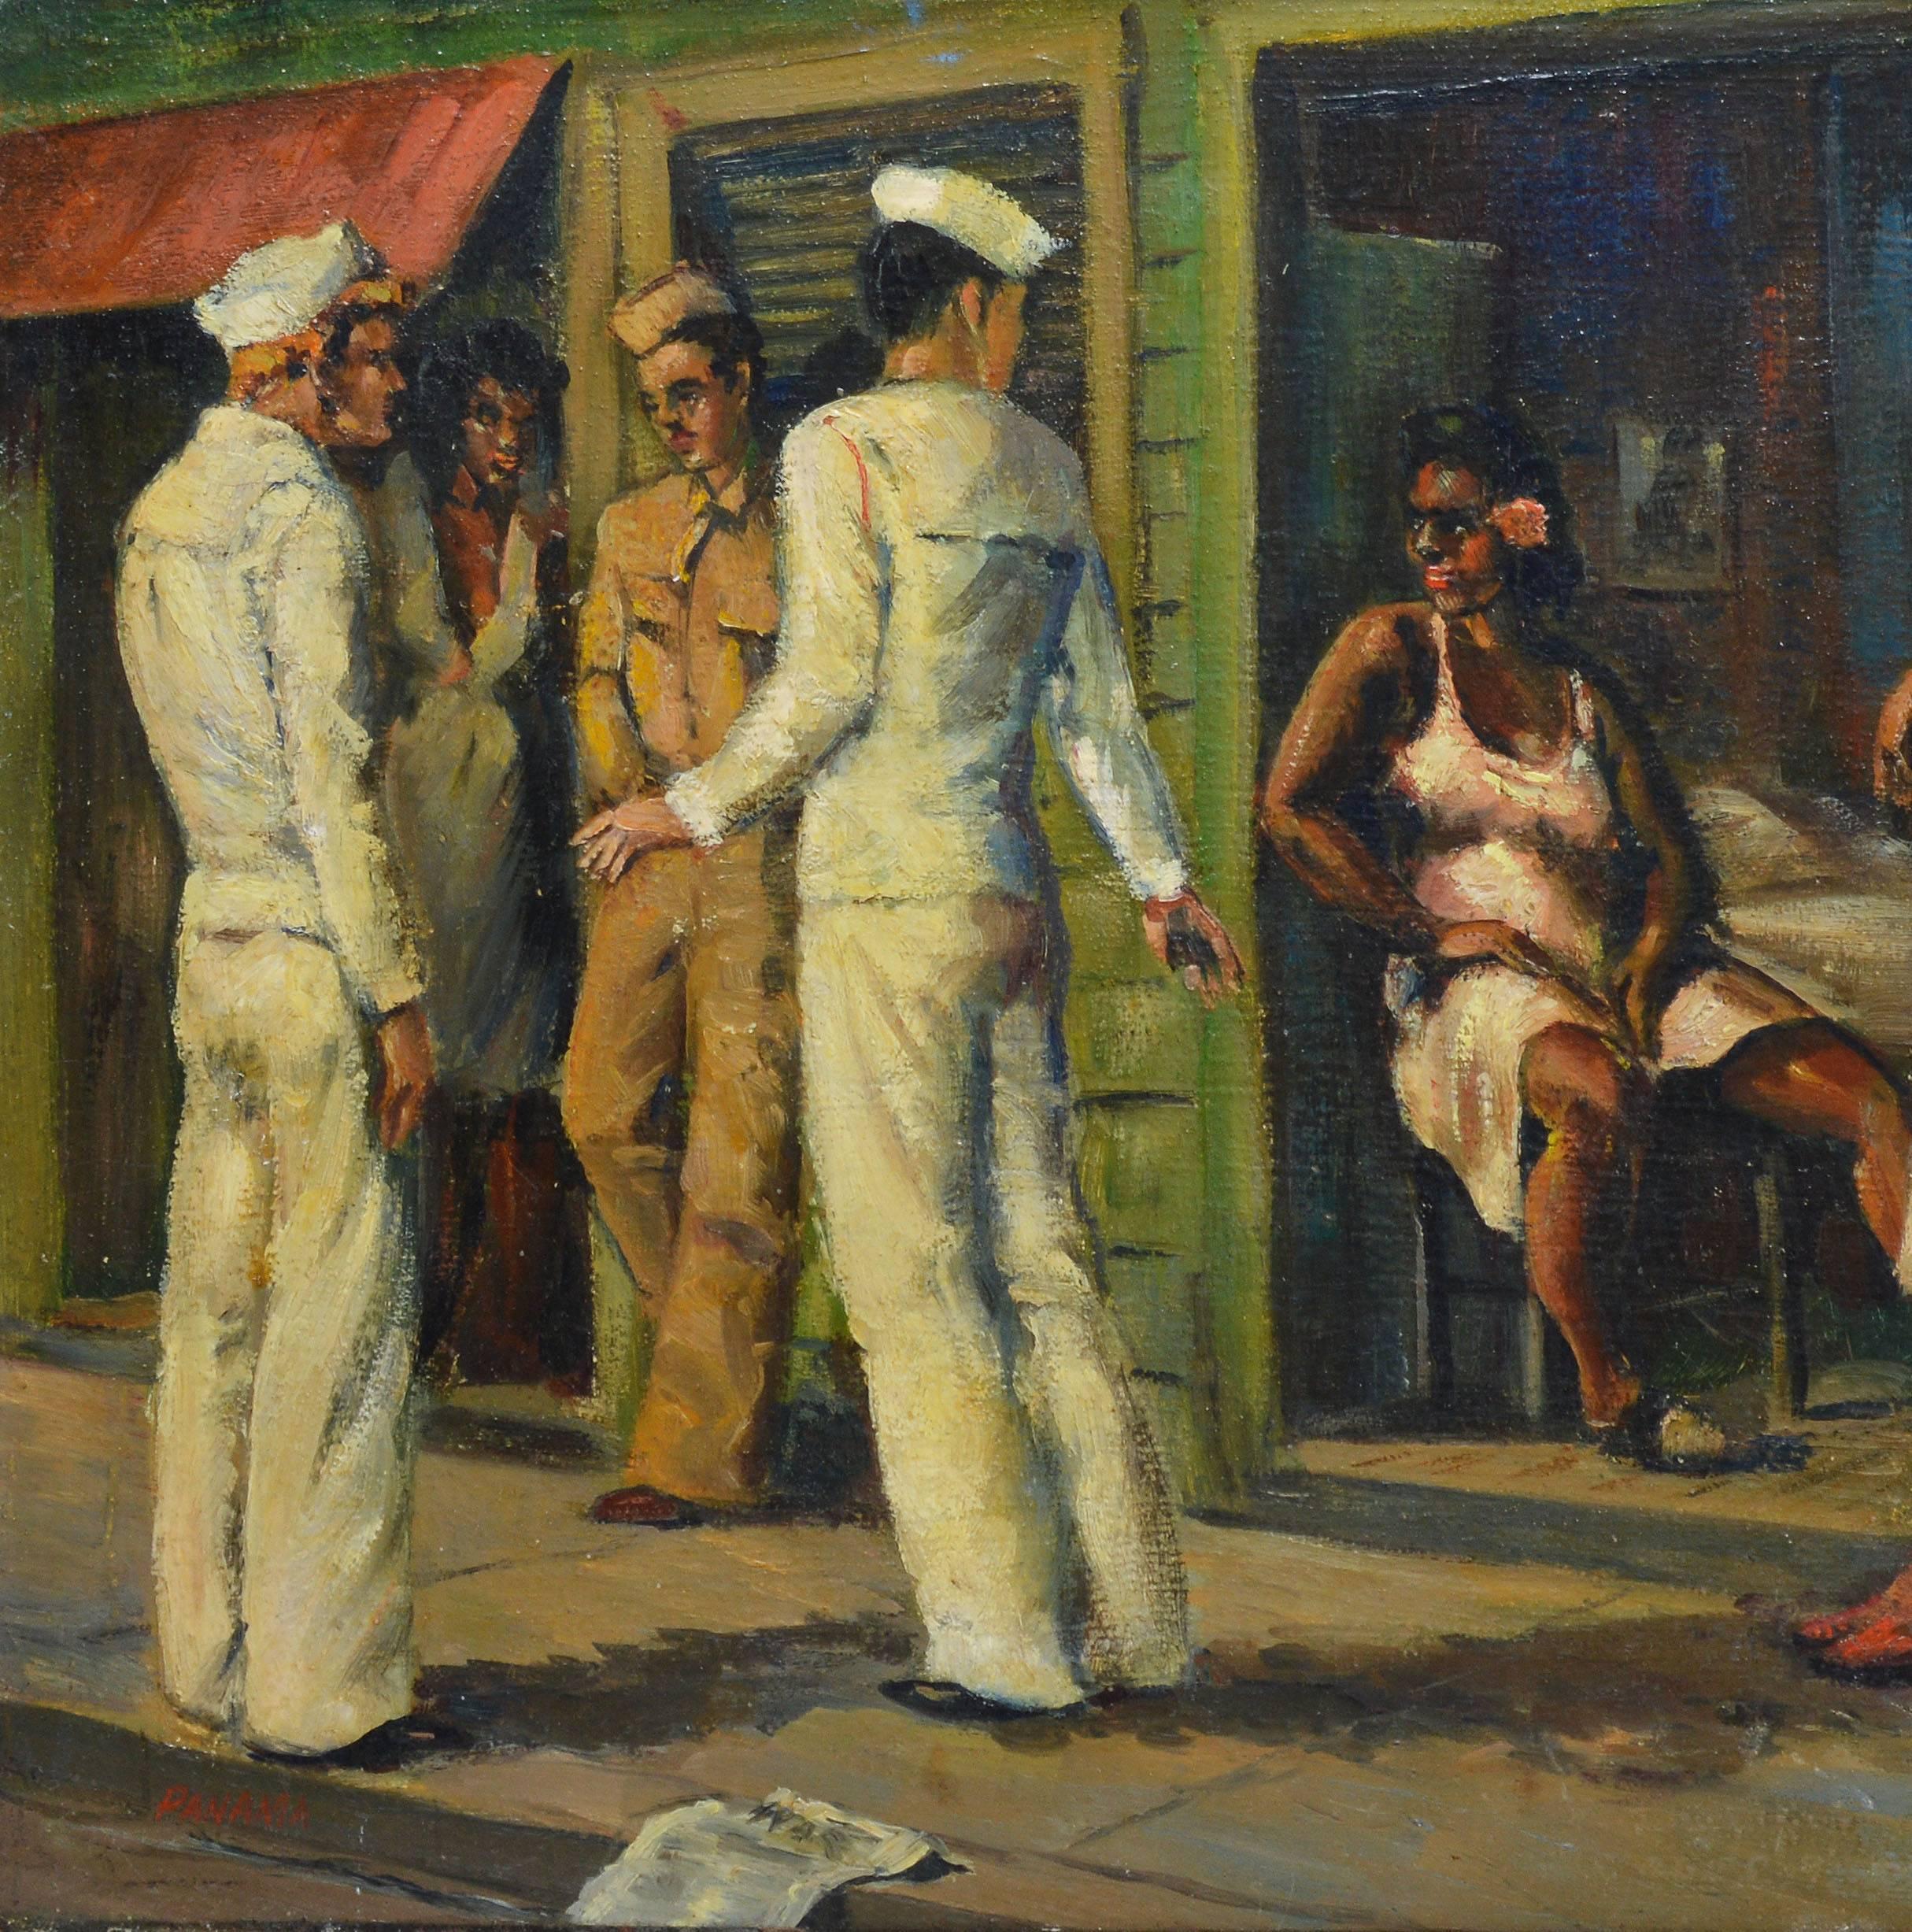 Modernist cityscape painting with sailors in a port.  Oil on board, circa 1942.  Signed lower right, 